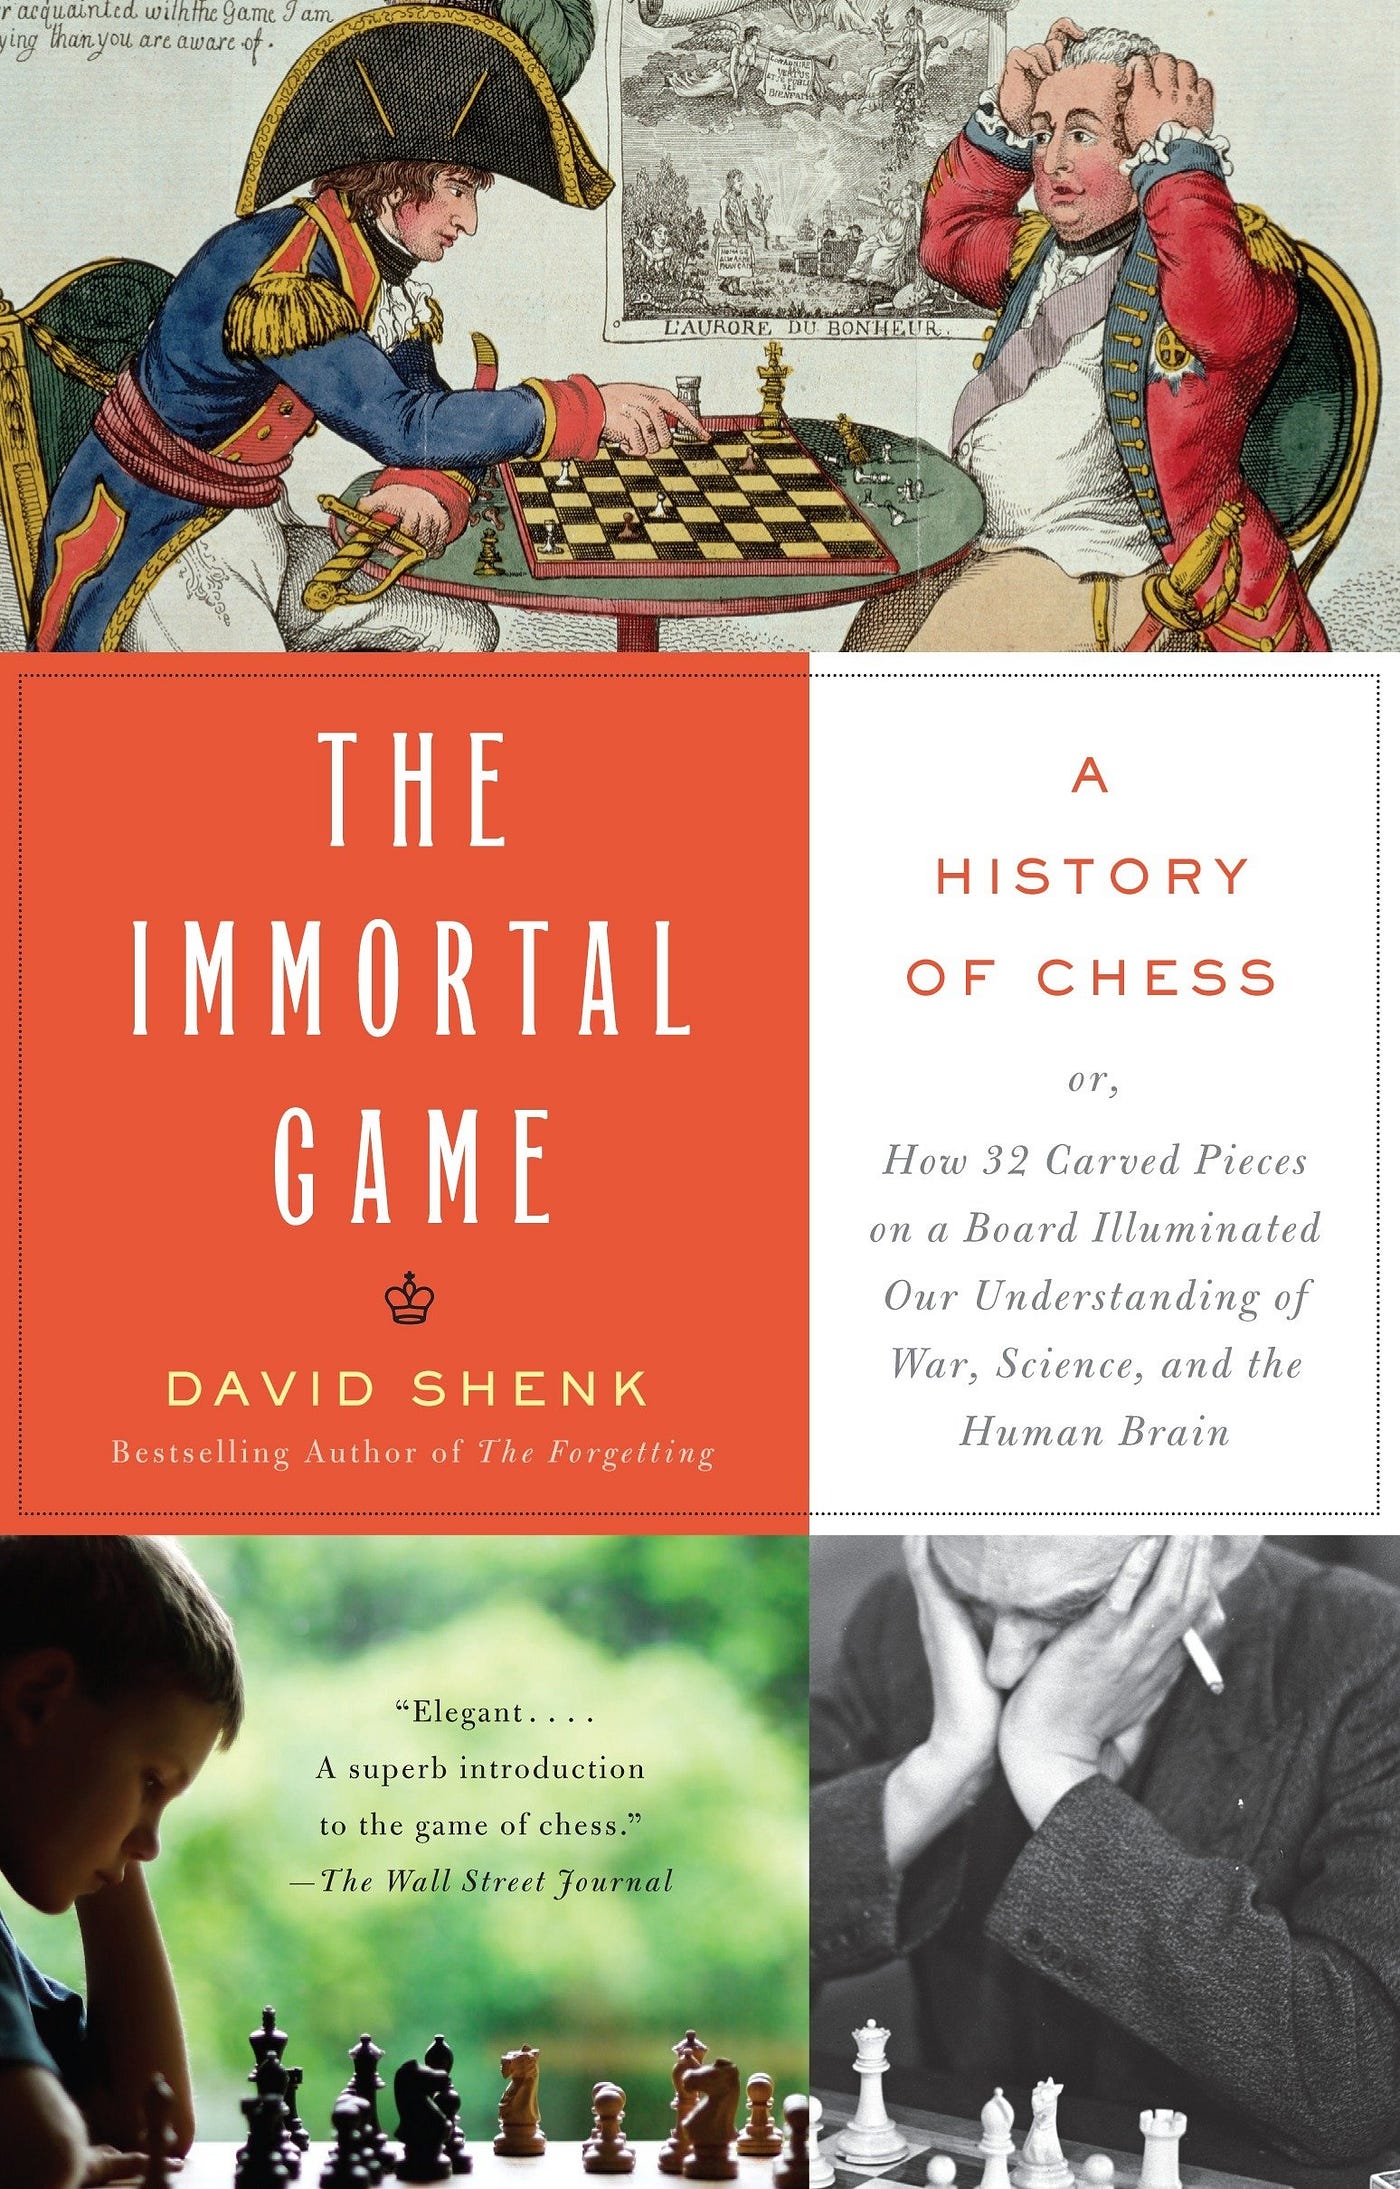 REVIEW: The Immortal Game: A History of Chess by David Shenk, by Jessi  Shakarian